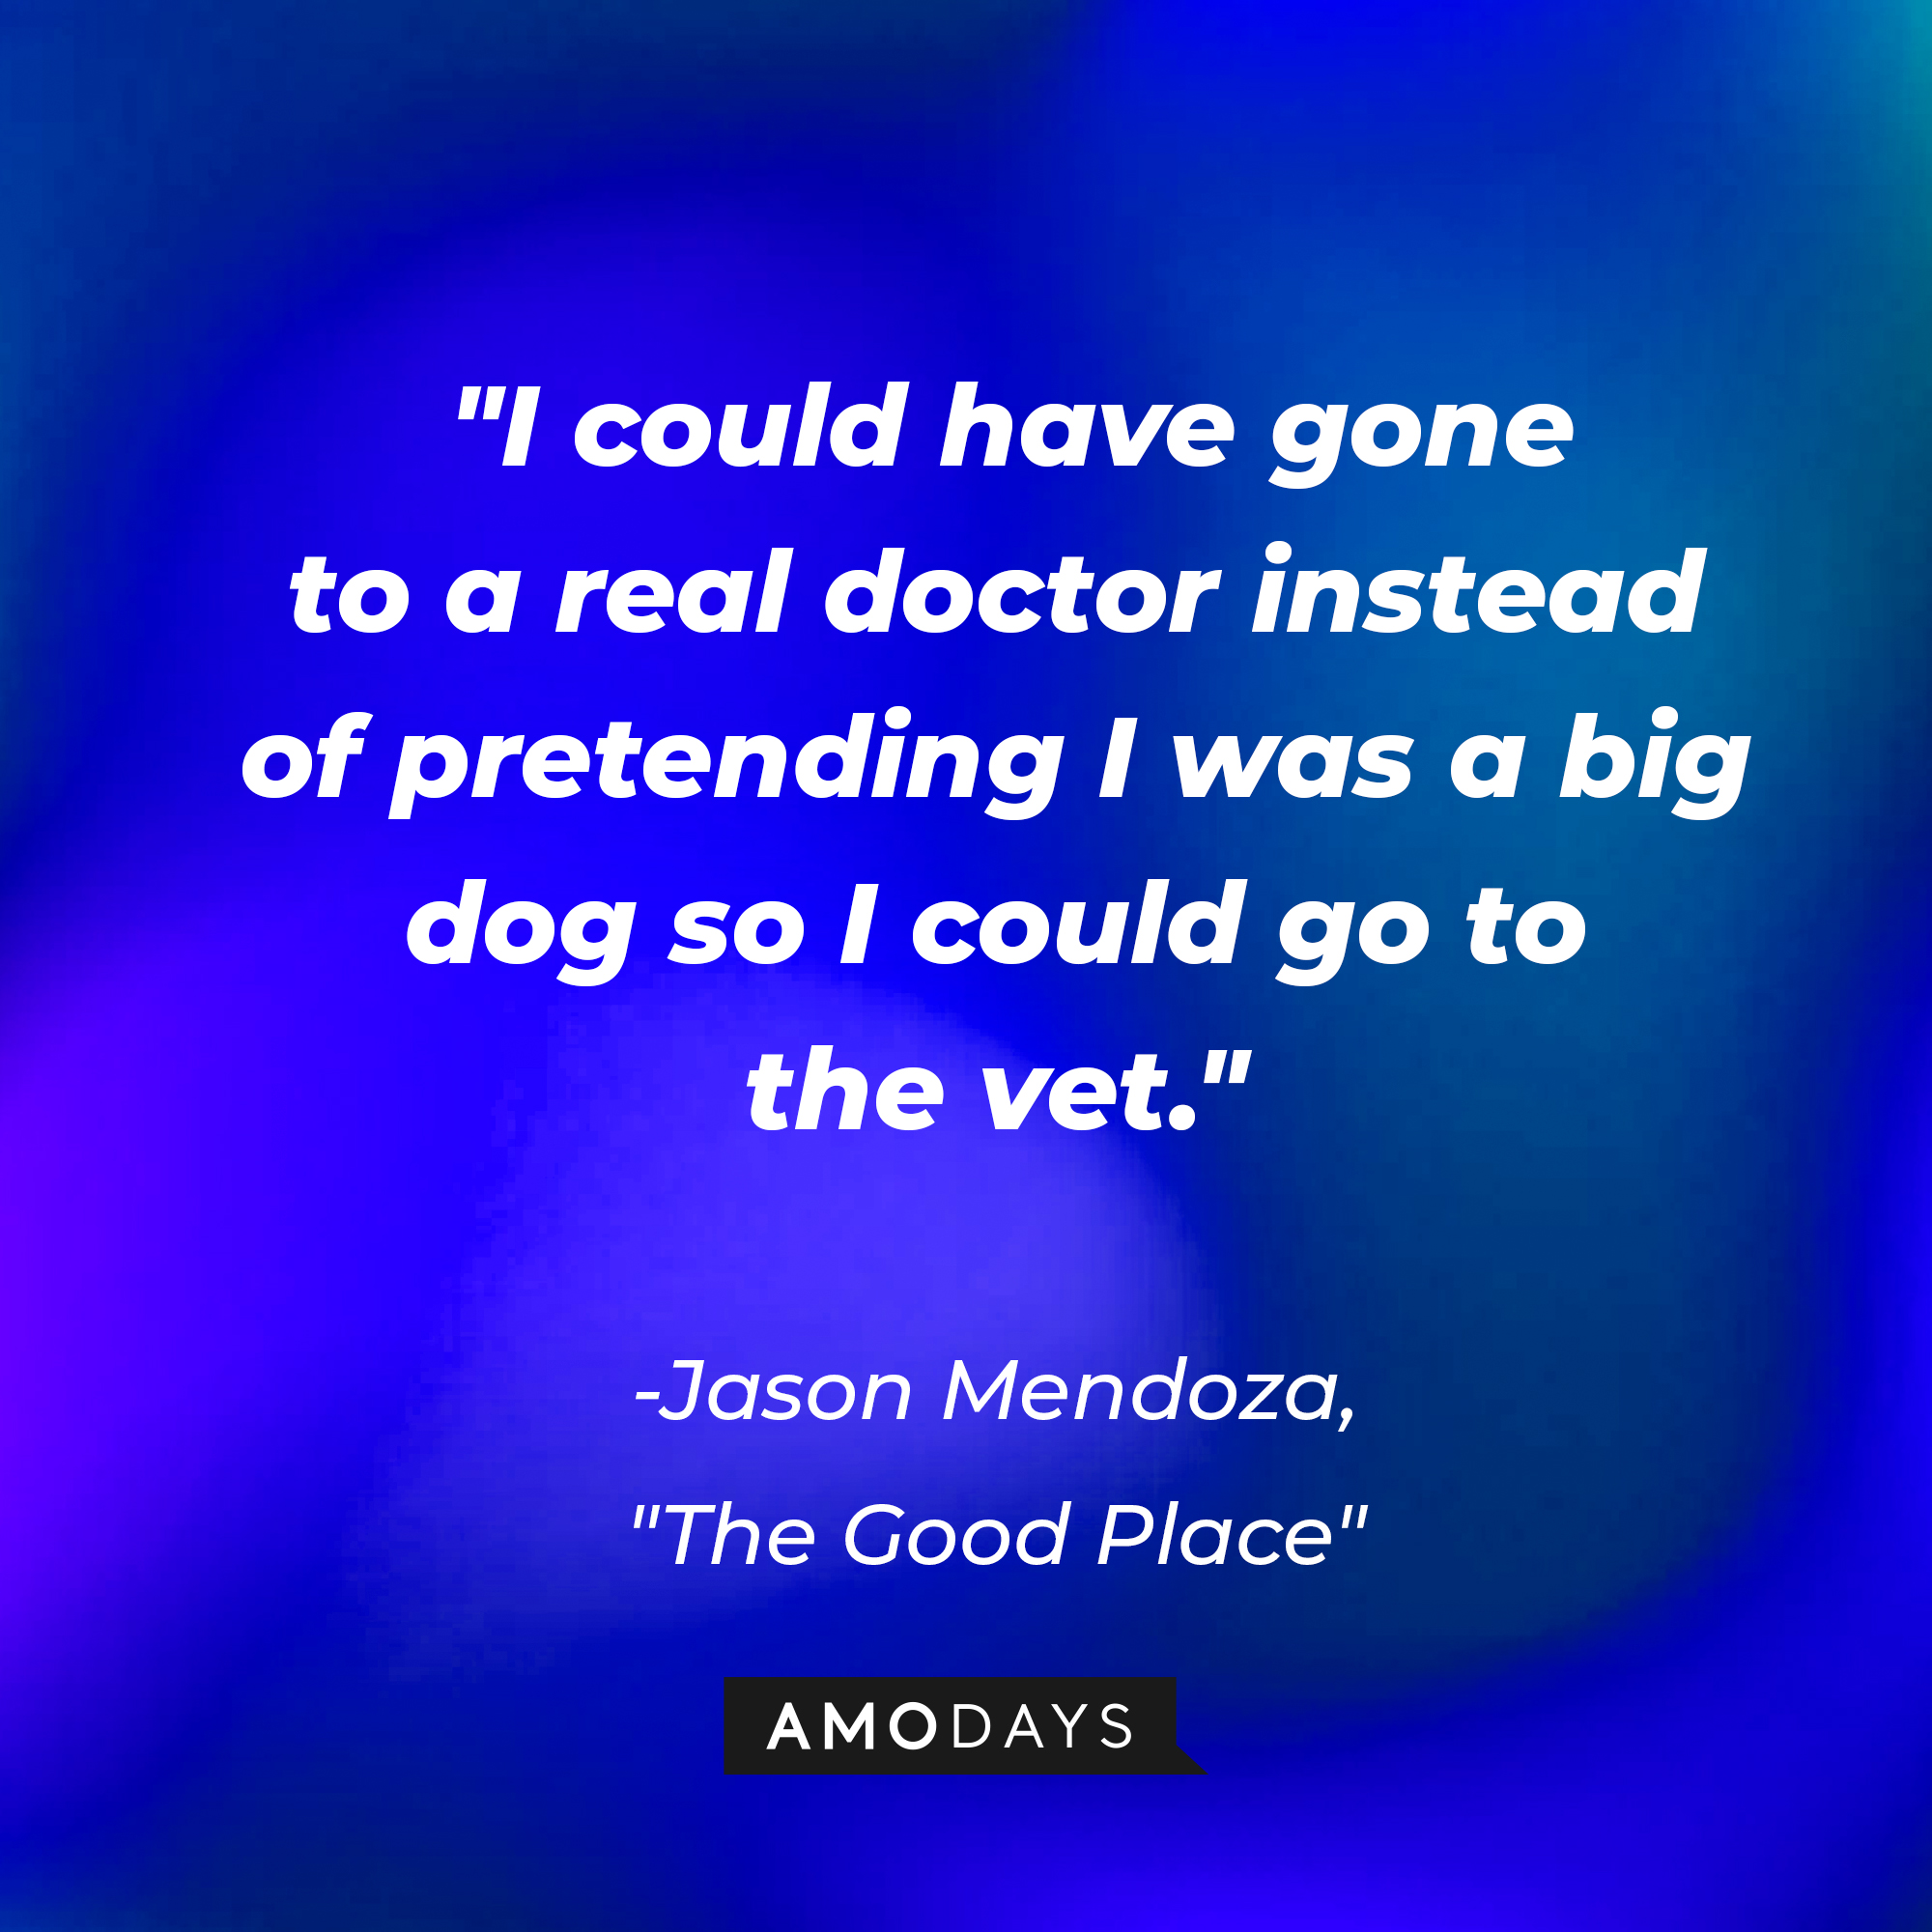 Jason Mendoza's quote in "The Good Place:" “I could have gone to a real doctor instead of pretending I was a big dog so I could go to the vet.” | Source: Amodays